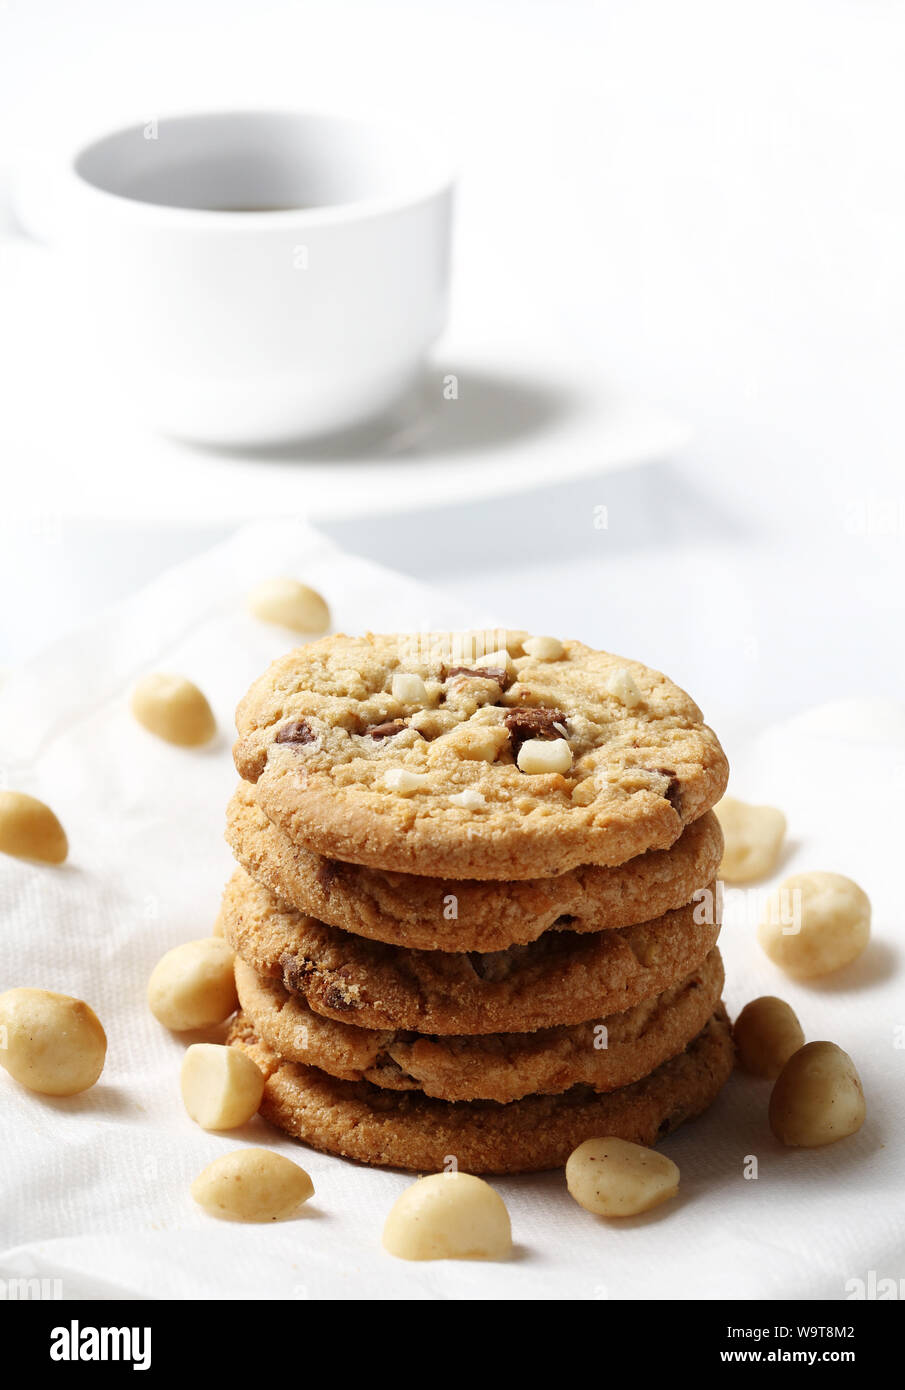 the chocolate chip and macadamia cookies on dish set for coffee break Stock Photo